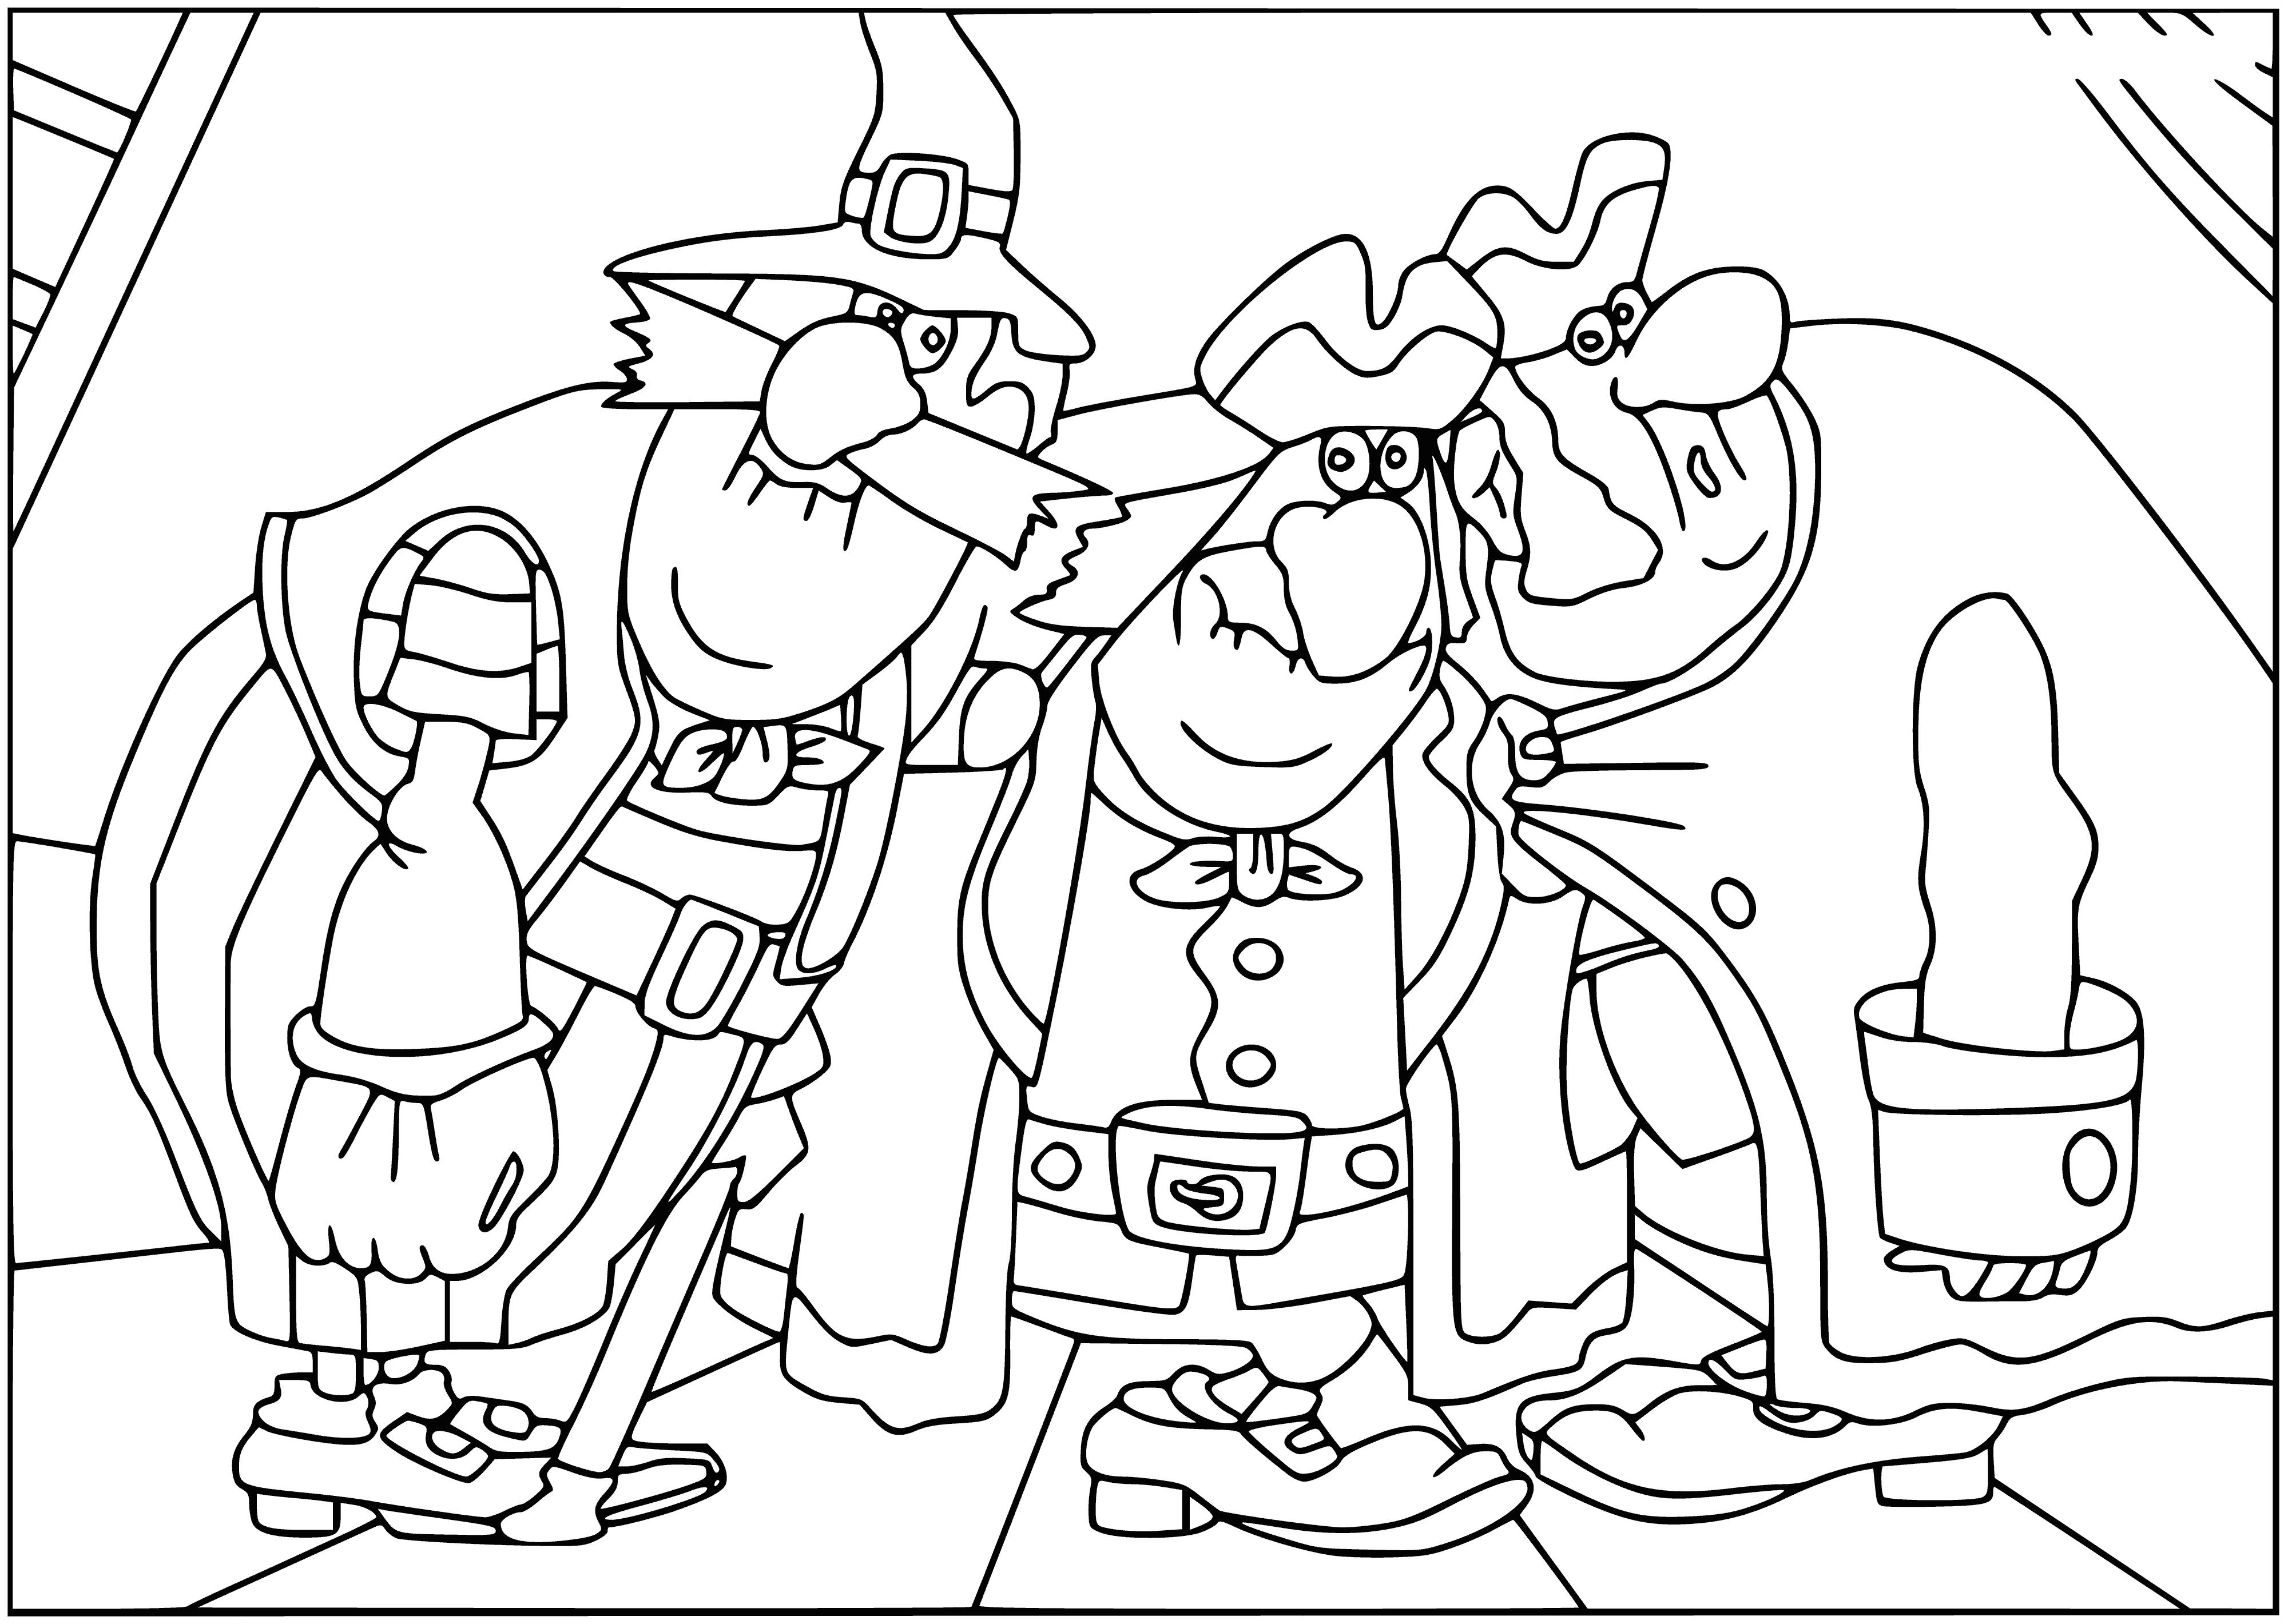 coloring page: Pirates sailing a silver ship on a dark sea under a bright full moon w/ cannons & a skull-crossbones flag. Mean & dangerous pirates onboard.